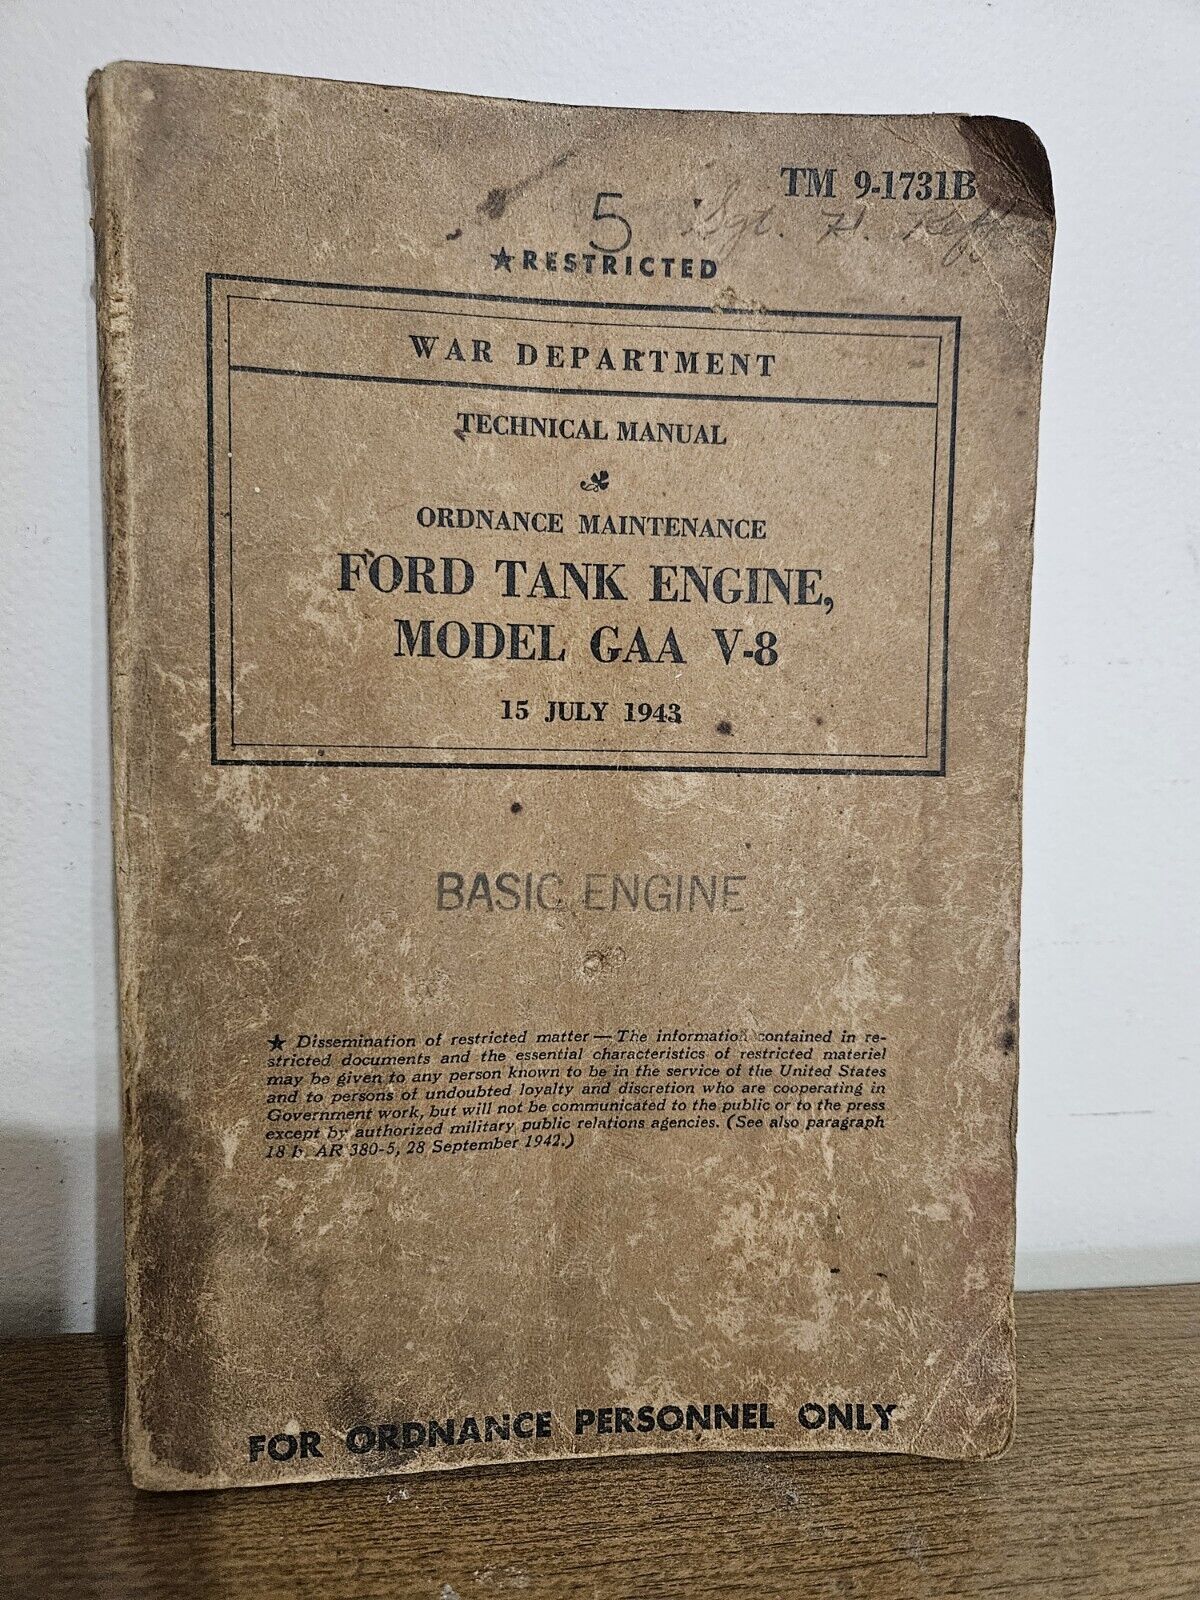 TM 9-1731B Technical Manual Ford Tank Engine GAAV8 War Department Restricted 